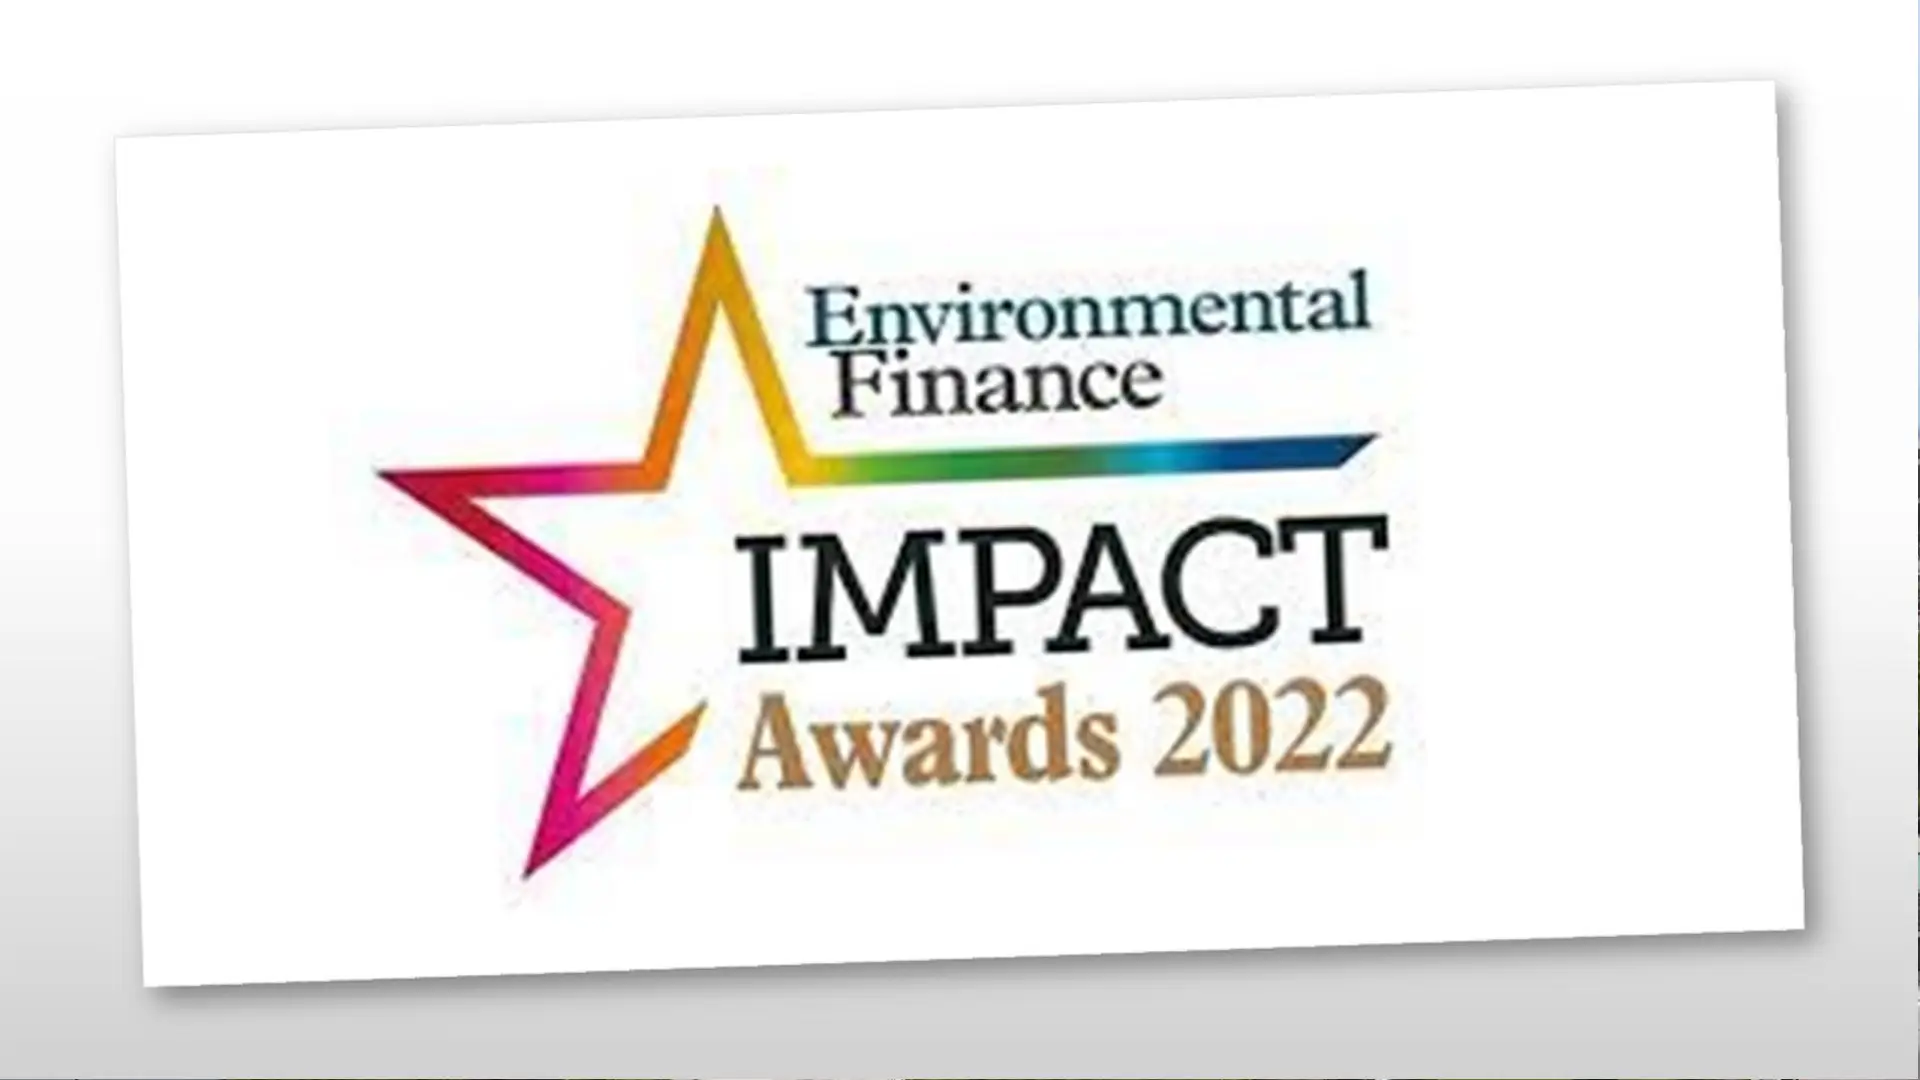 ARISE IIP wins two awards at the industry-reference “IMPACT Awards 2022” held by Environmental Finance